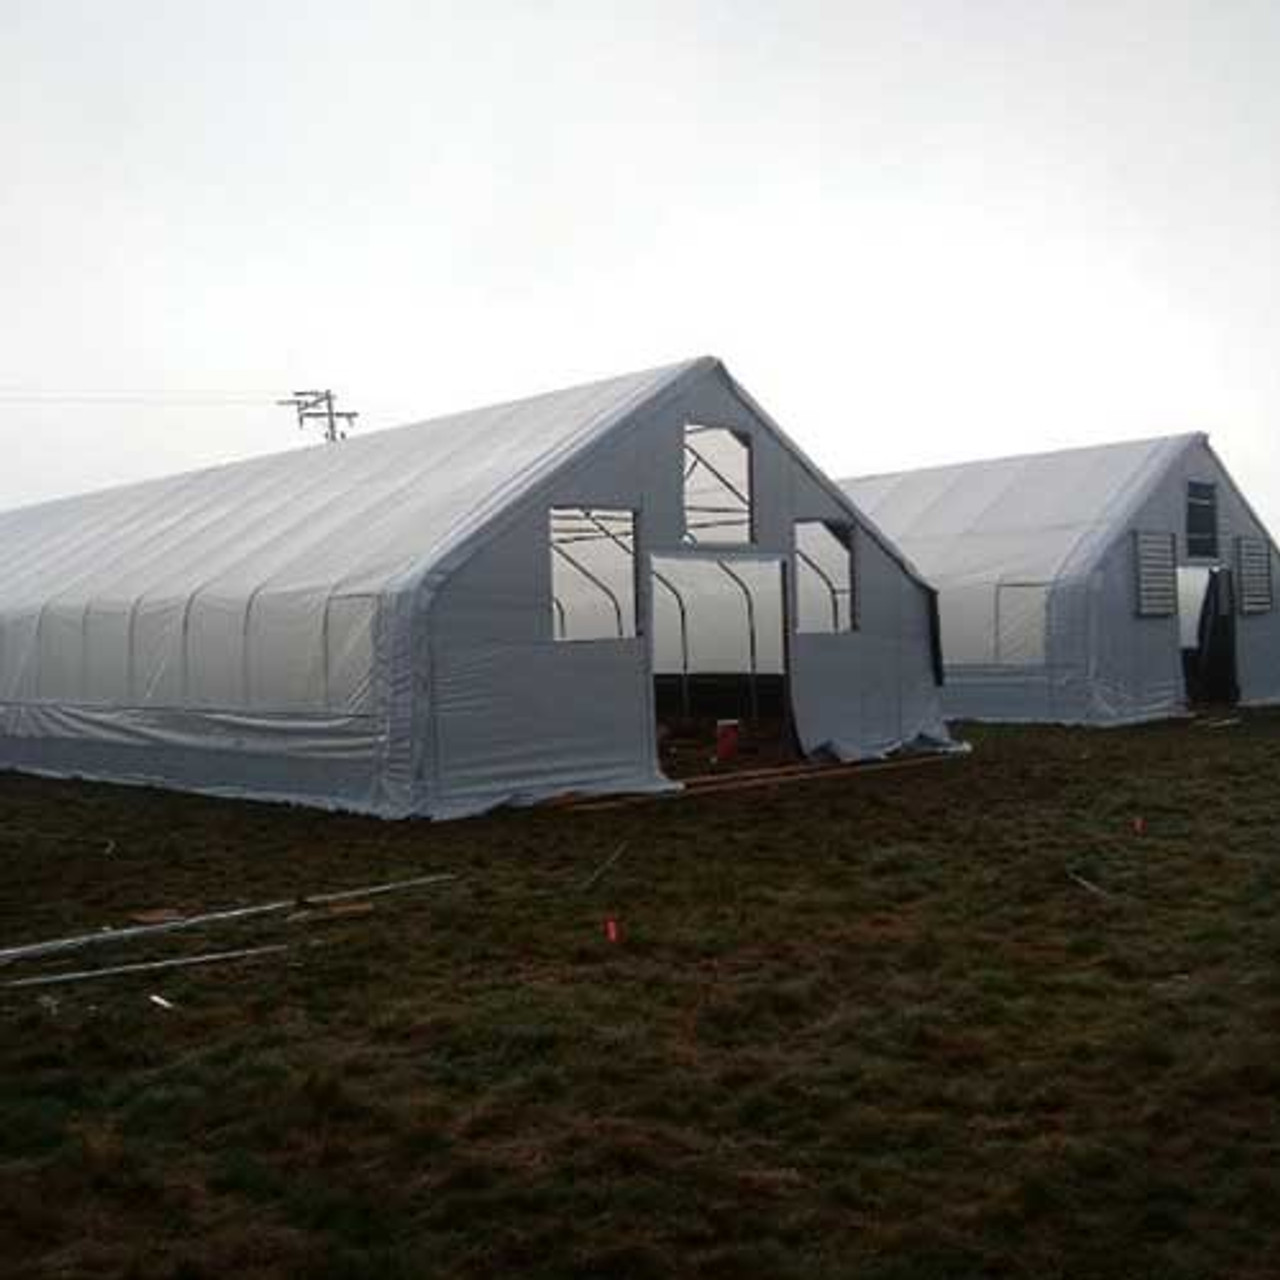 String Reinforced 4 Year UV Resistant 10 mil Clear Greenhouse